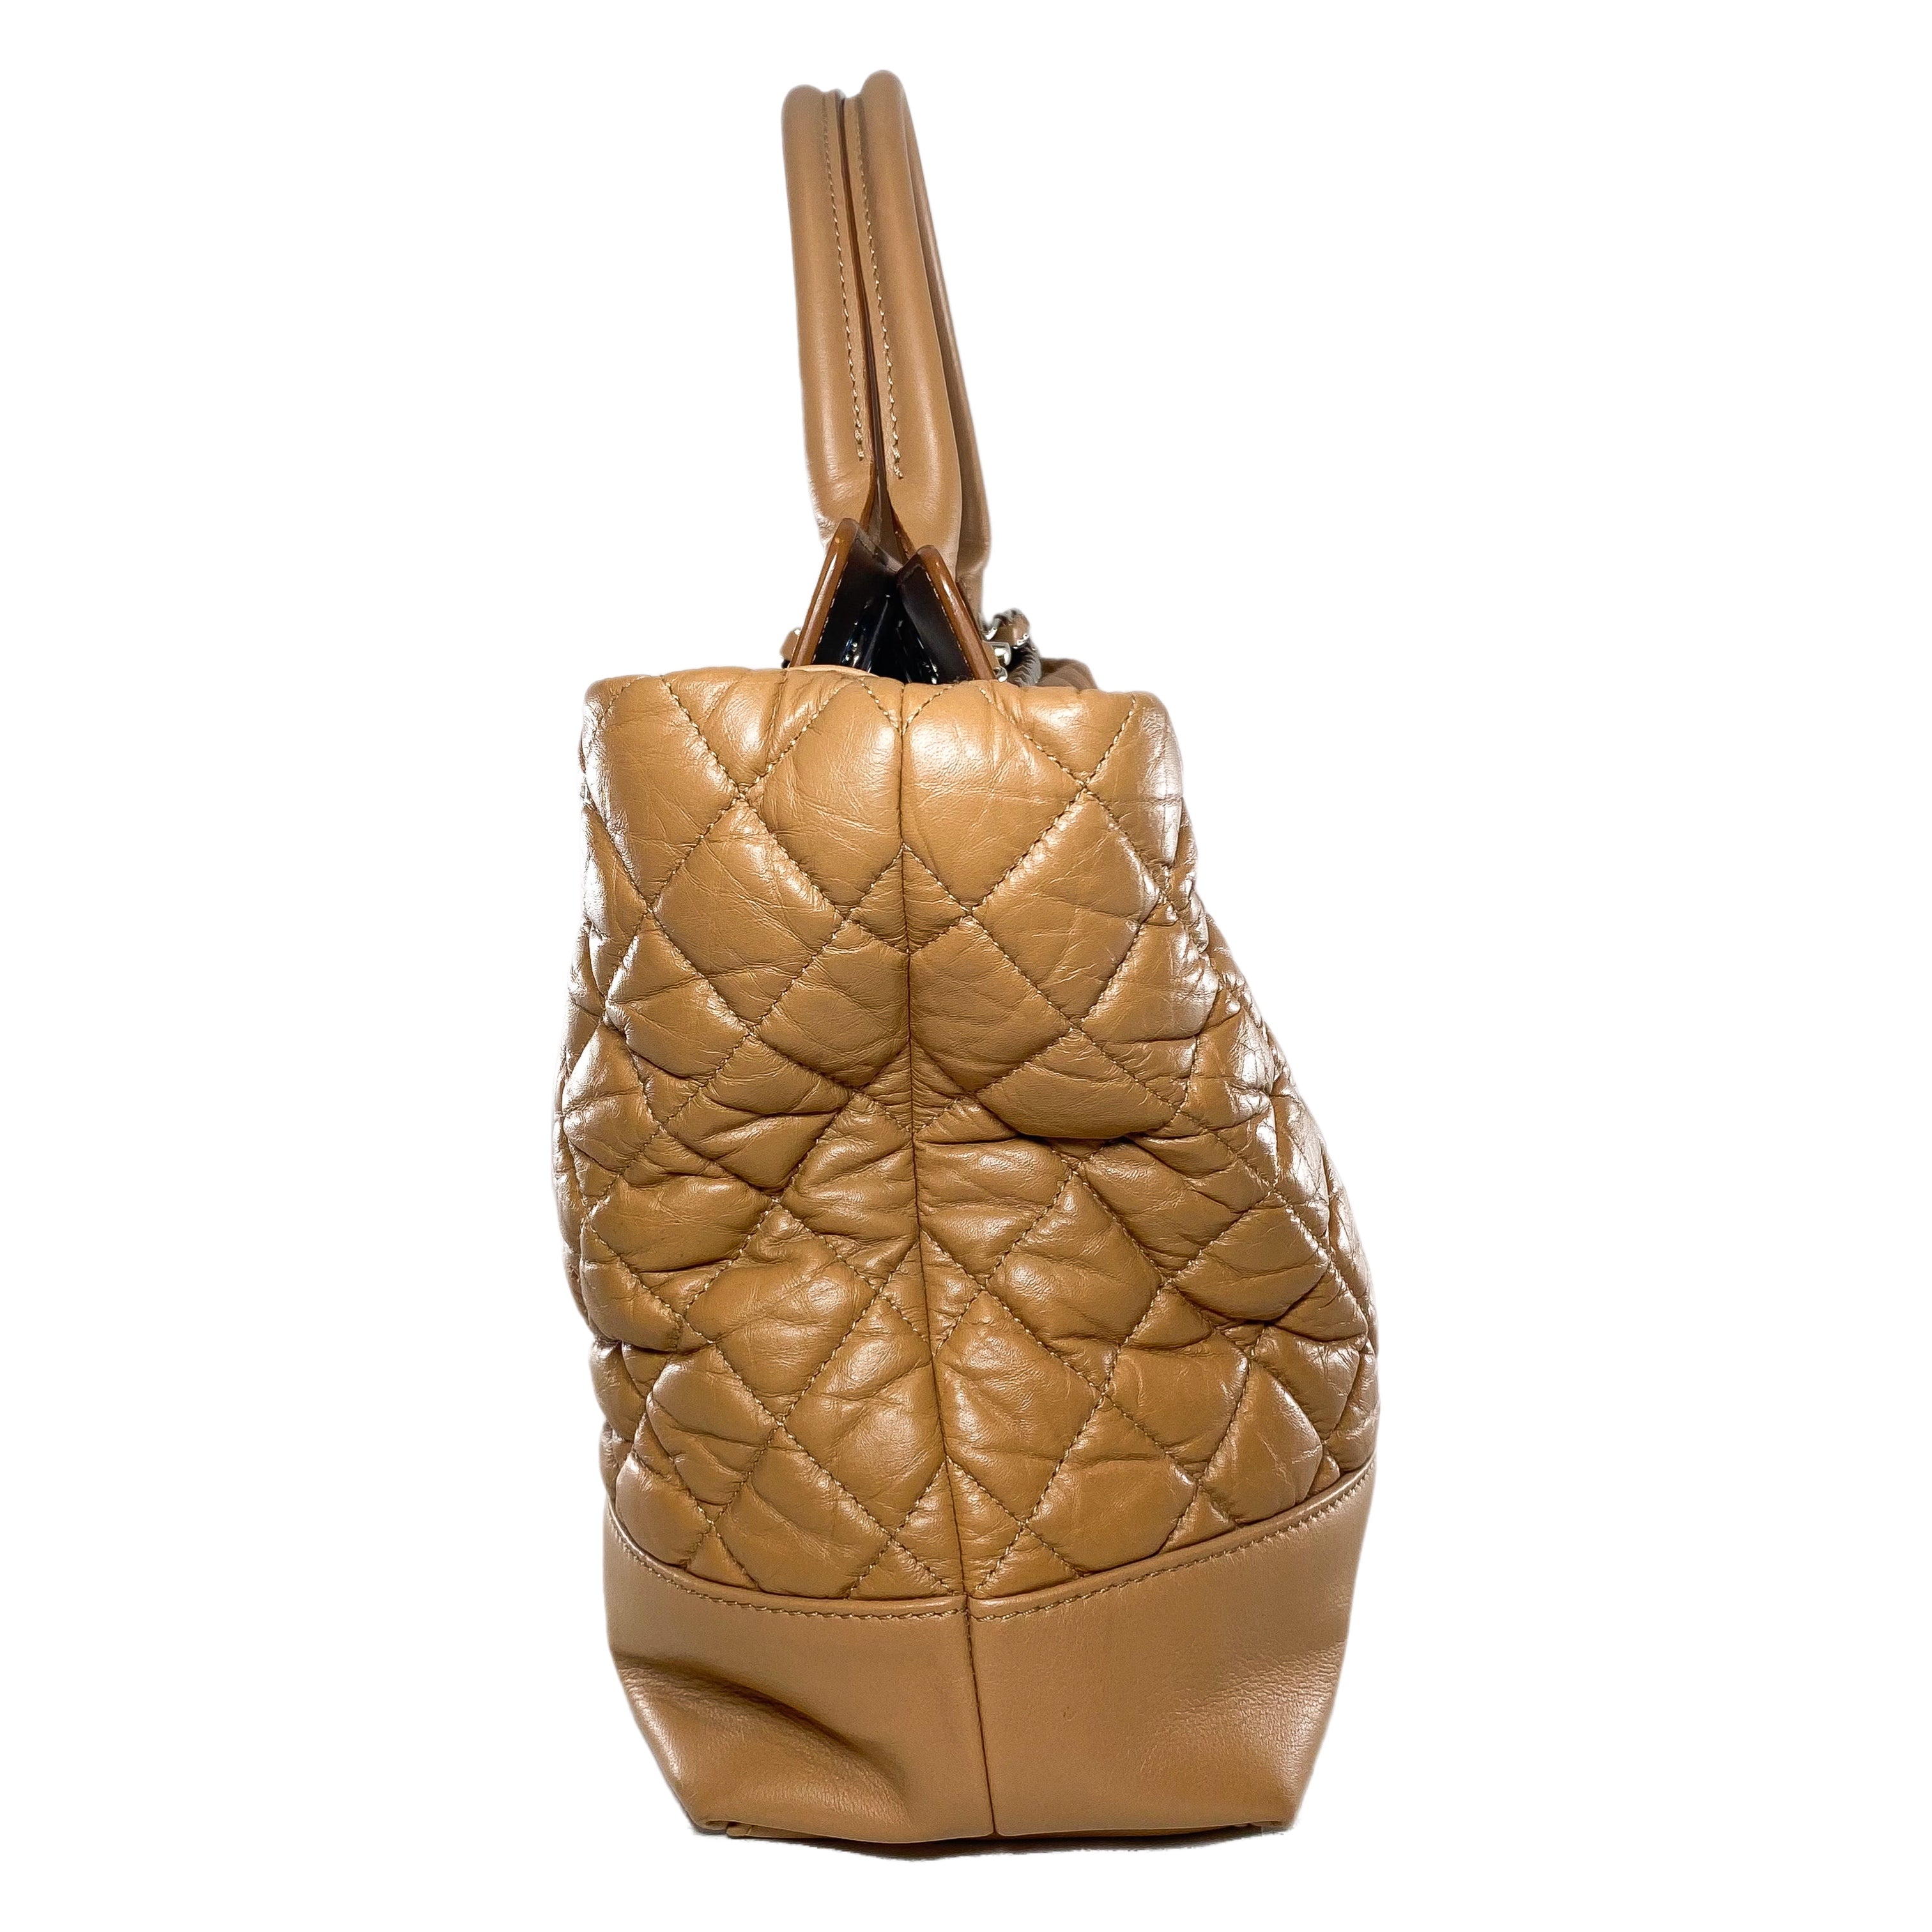 Chanel Beige Quilted Be CC Tote Bag